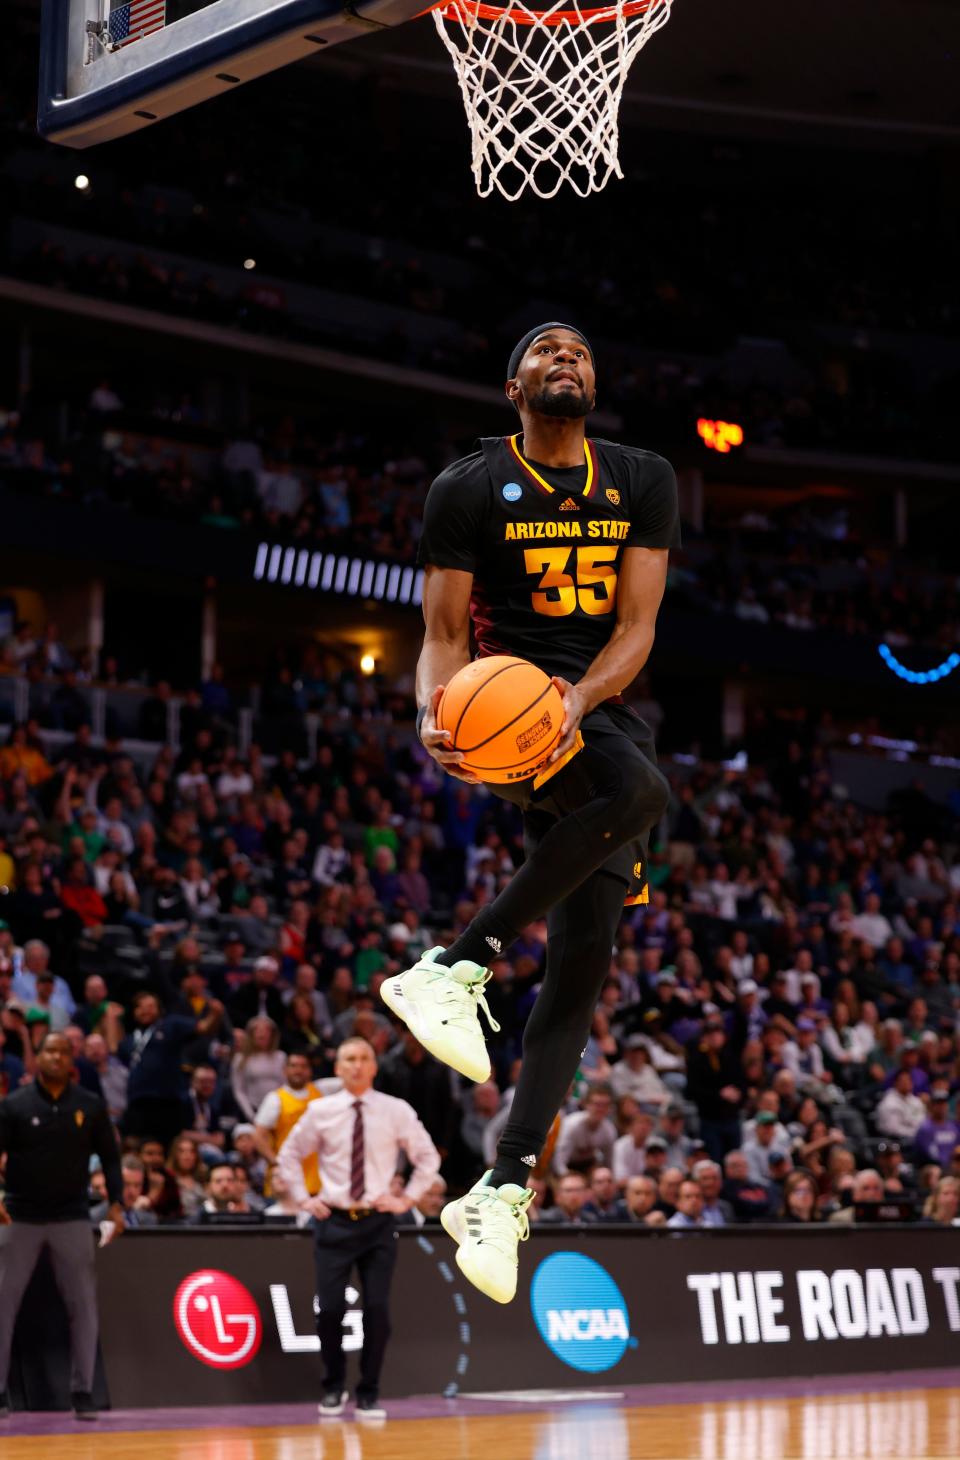 Arizona State guard Devan Cambridge (35) goes in for a dunk during an NCAA Tournament game in March against TCU. Cambridge, who averaged 9.8 points and 5.4 rebounds per game last season, announced Saturday he will transfer to Texas Tech.